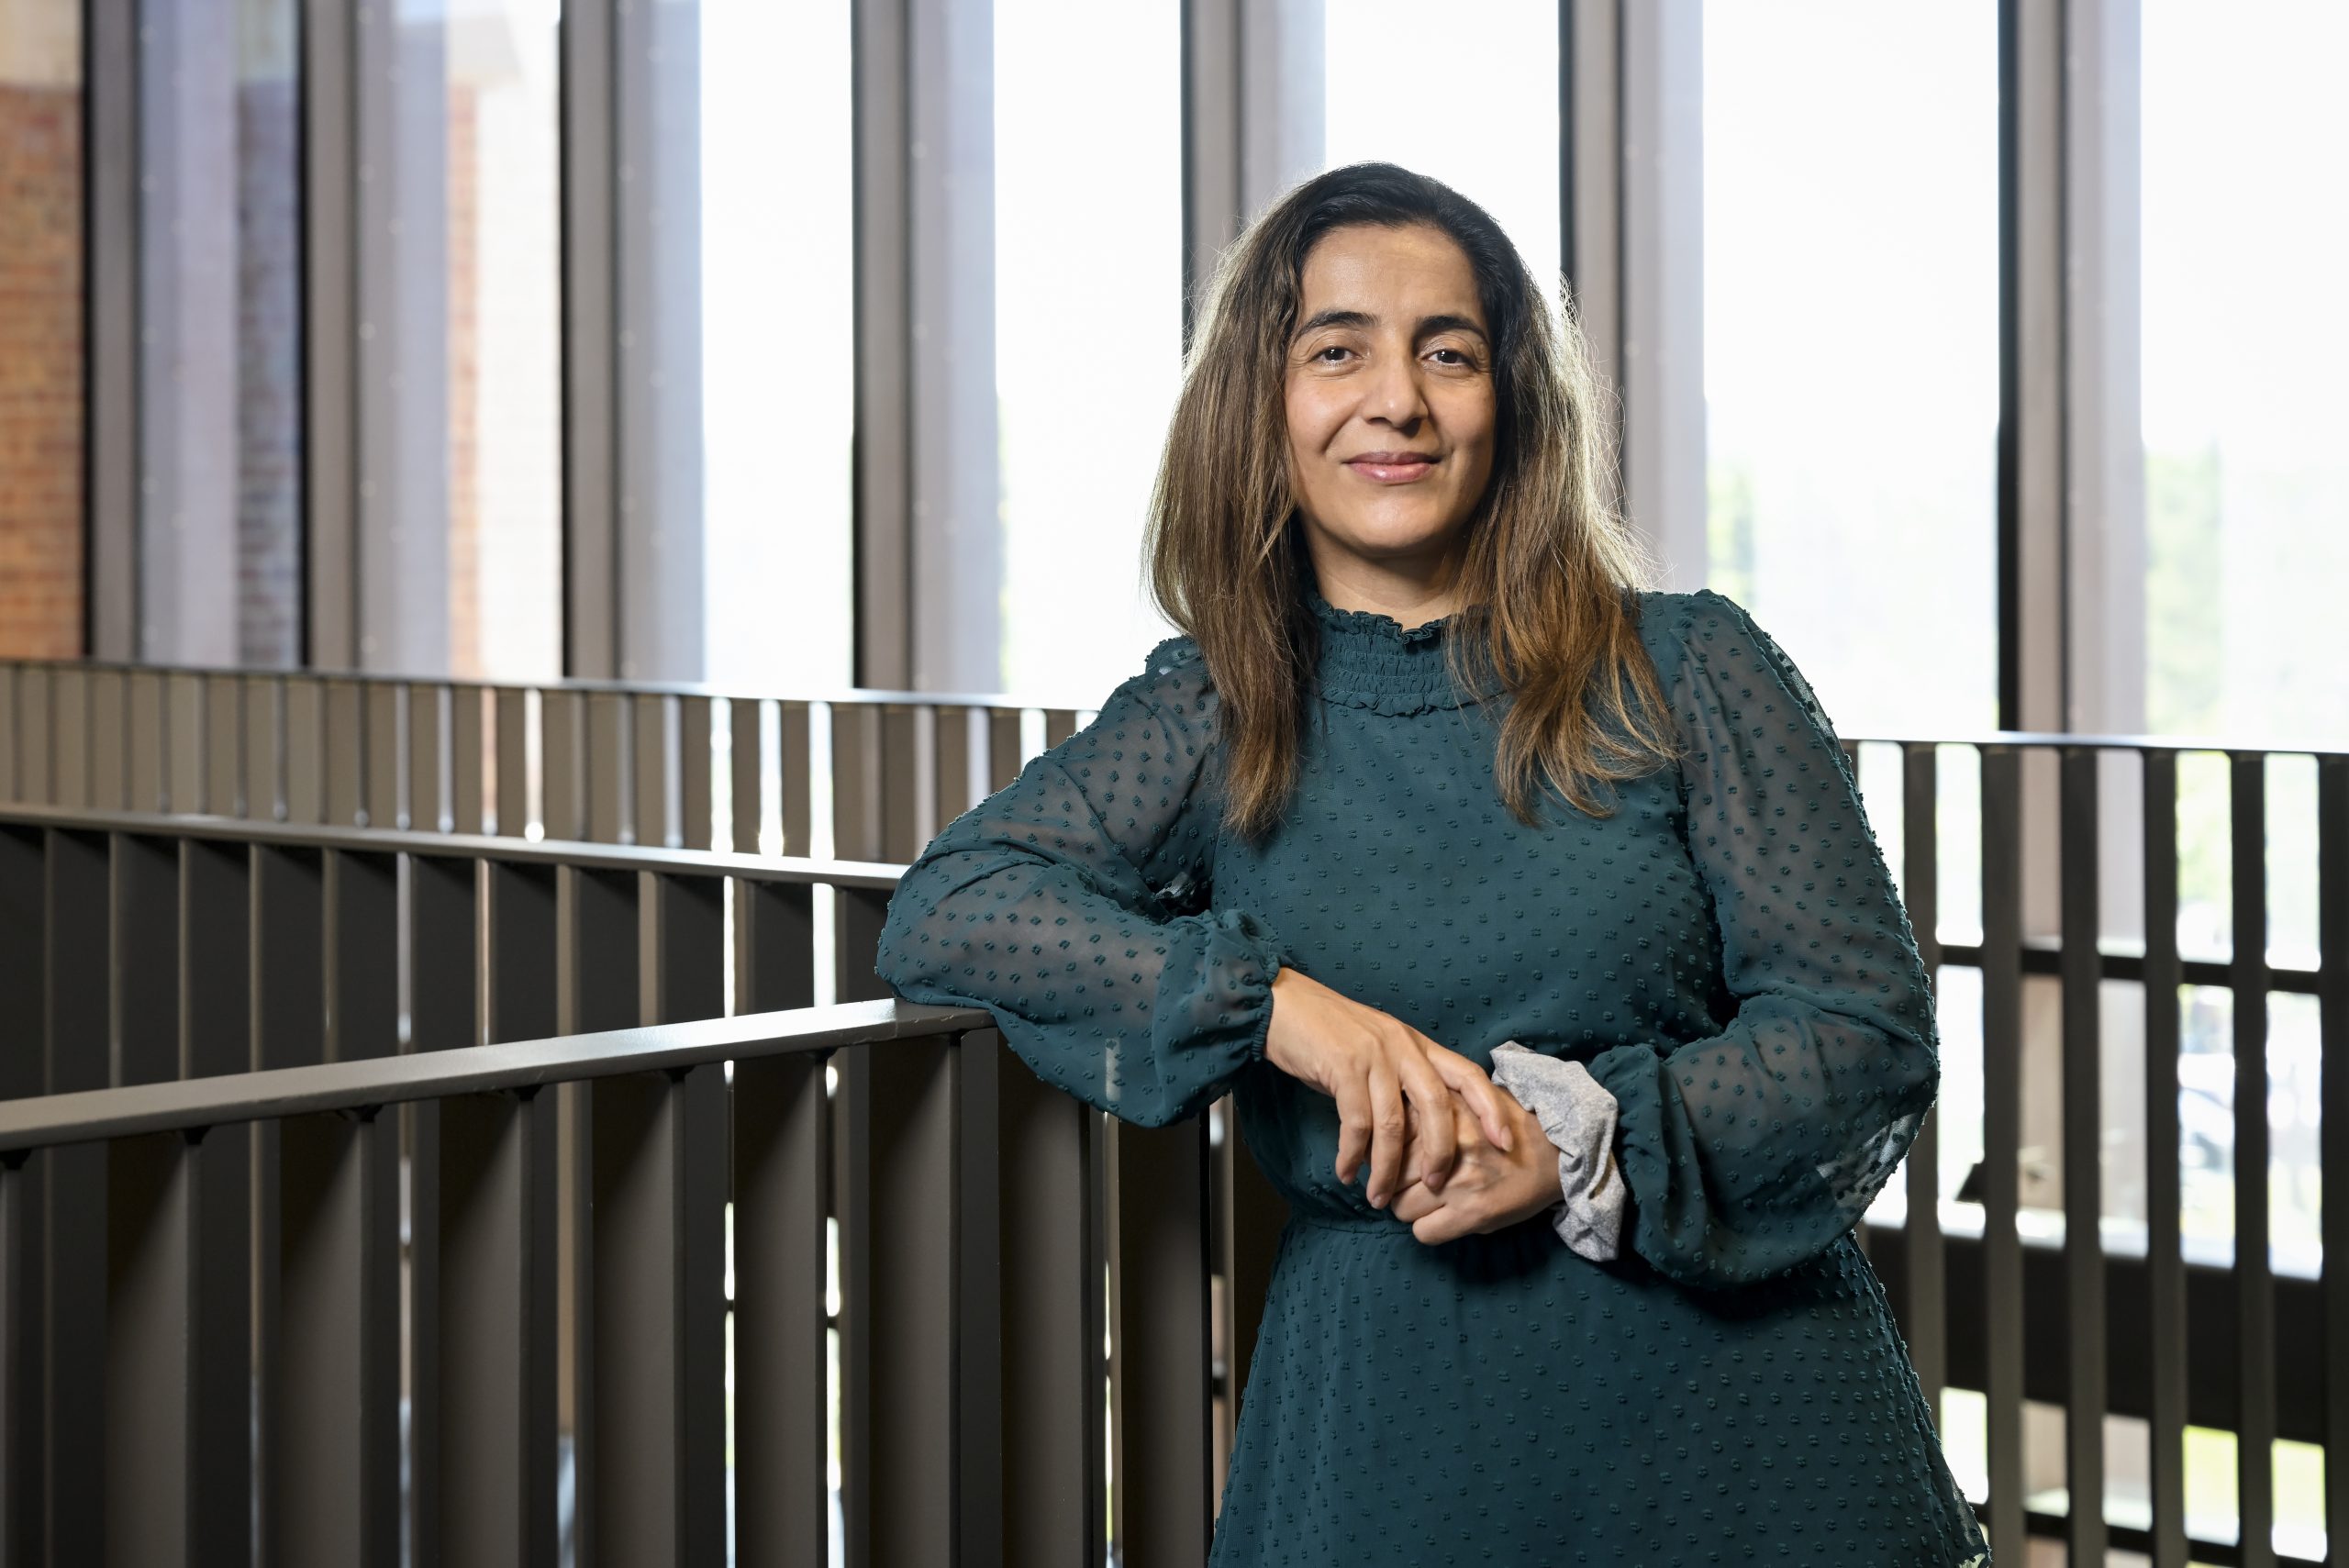 Dr. Akram Mahani, assistant professor in the Johnson Shoyama Graduate School of Public Policy, received $10,000 from SHRF to for her project linking health and urban planning. (Photo courtesy of JSGS)